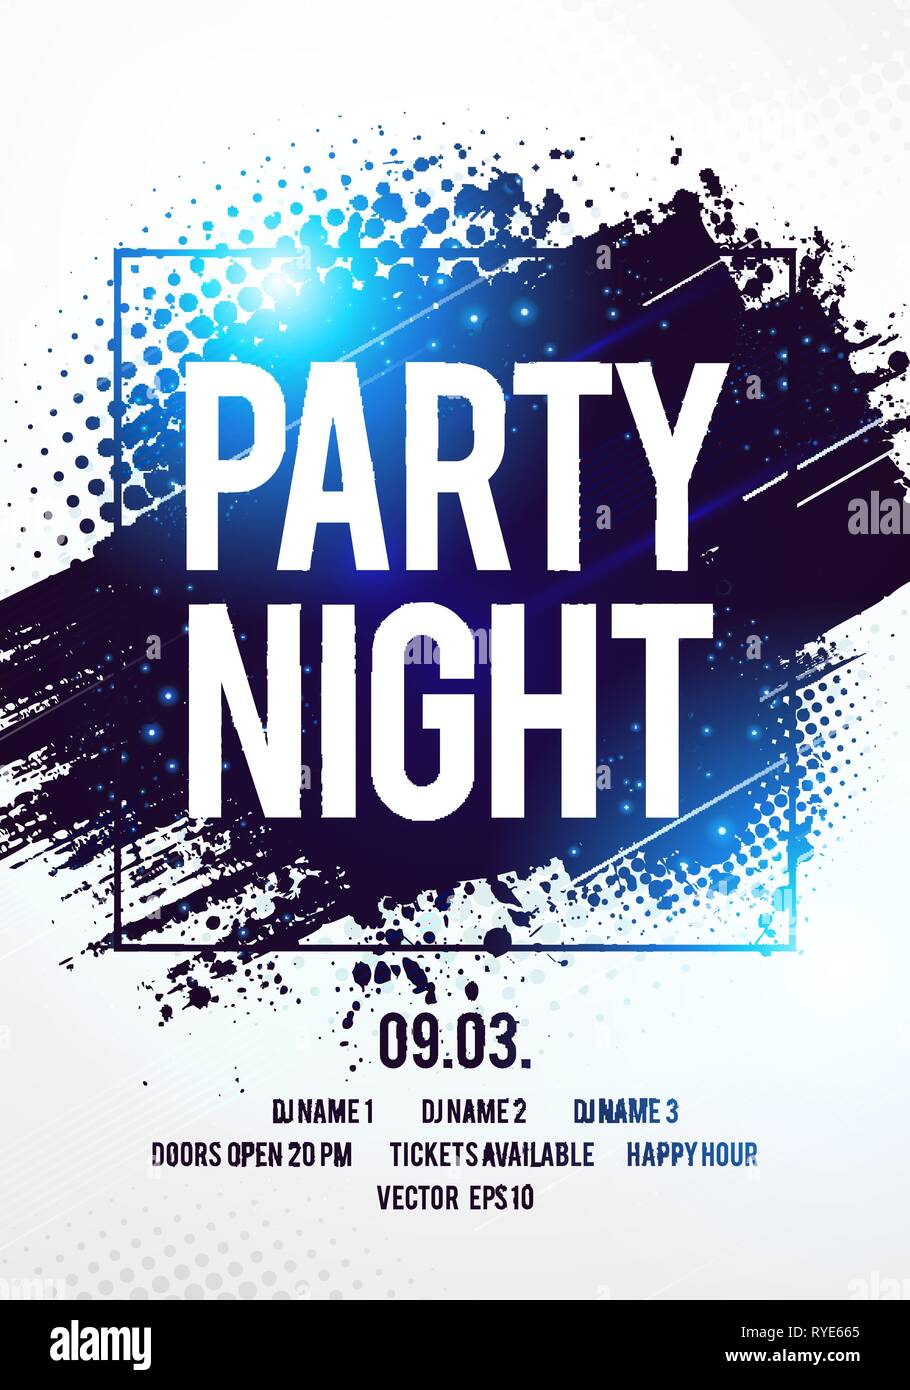 Vector Illustration Club Disco Party Night Flyer Dancing Event Template With Colorful Background And Space For Text Stock Vector Image Art Alamy